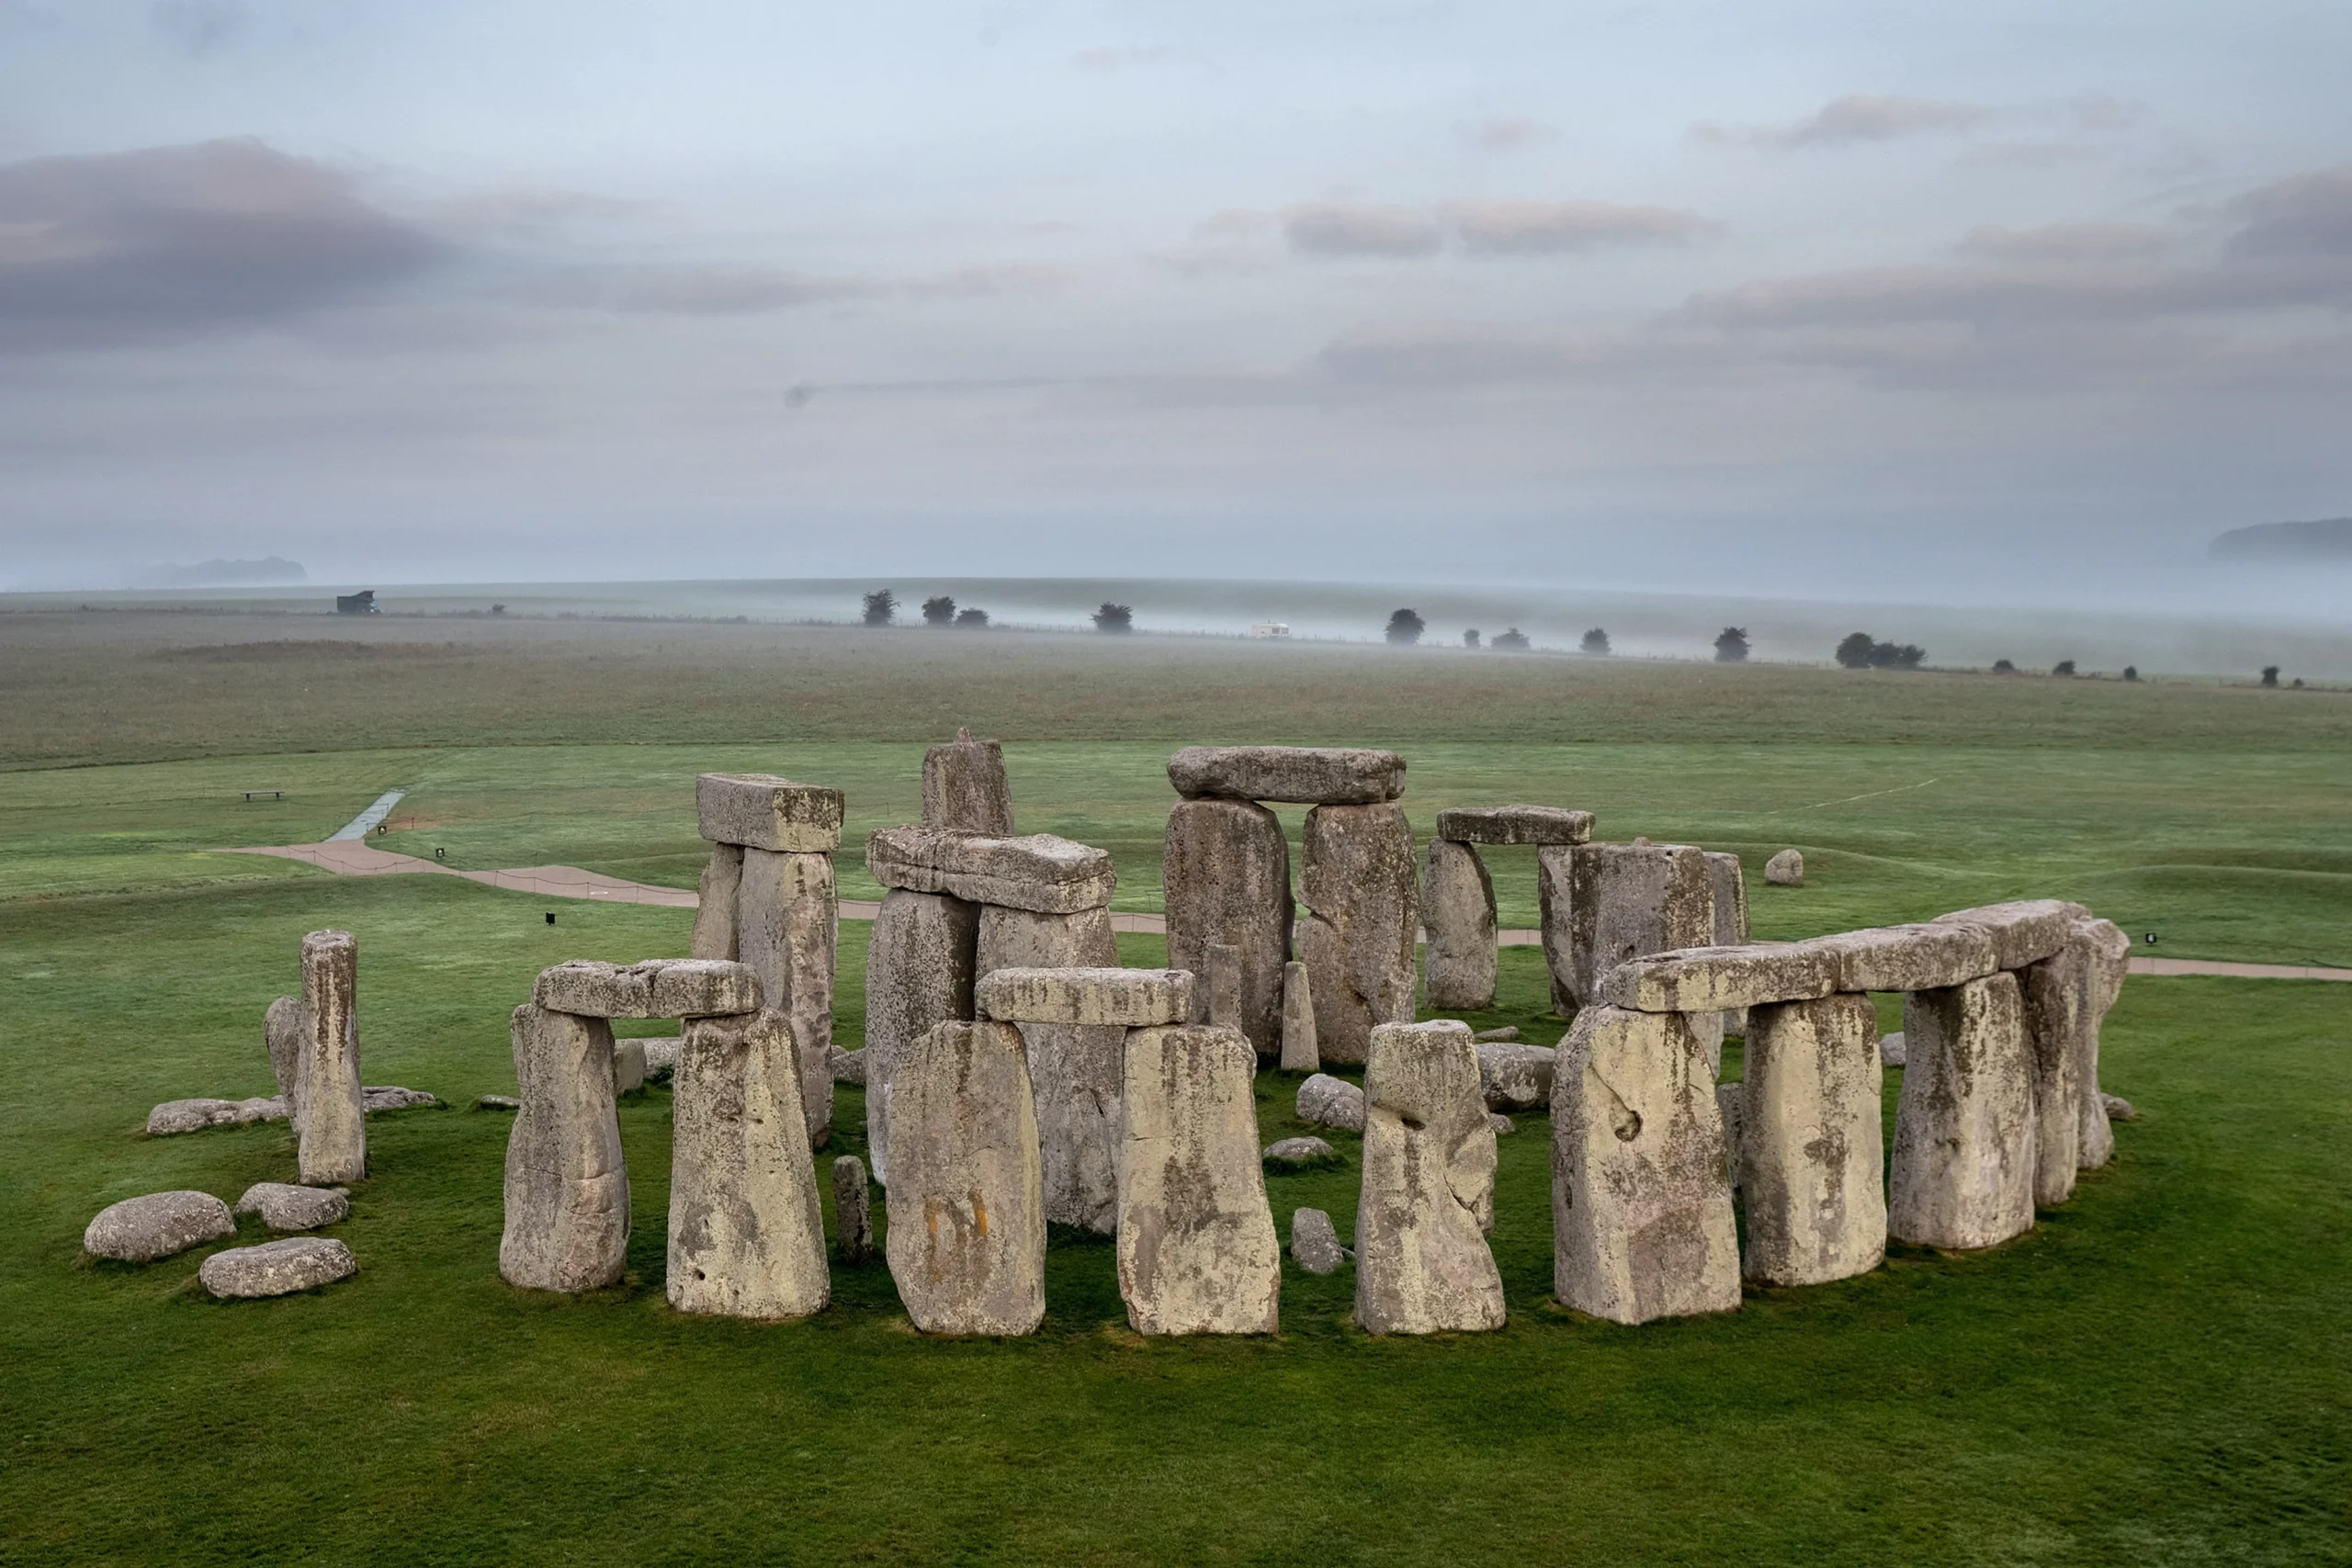 The Enigmatic Enclaves: Unraveling the 10 Most Mysterious Places in the World